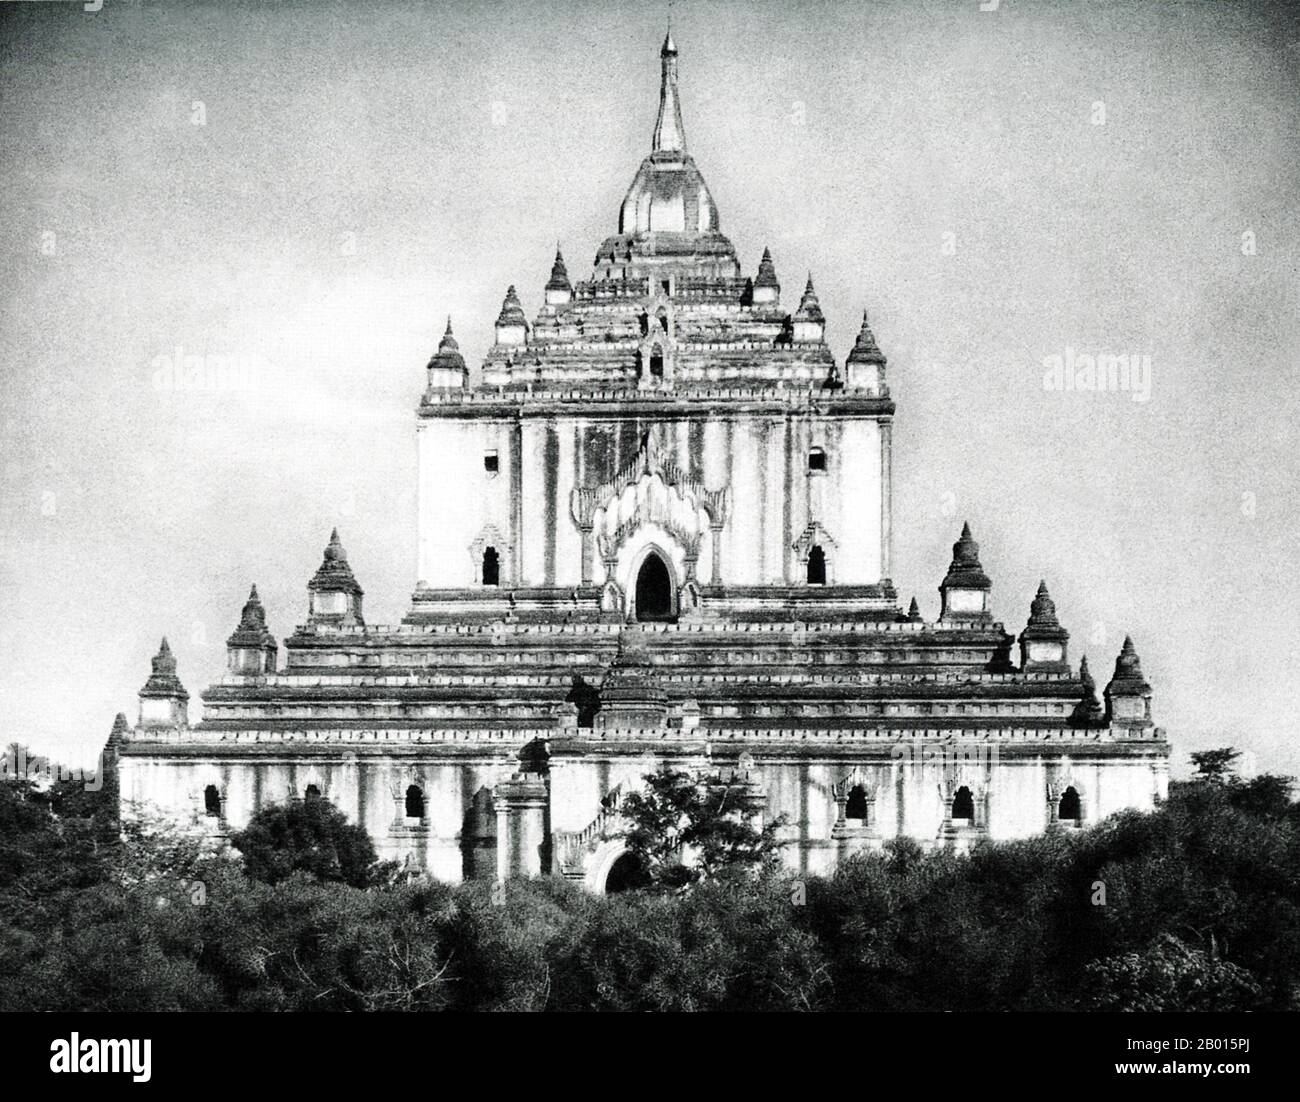 Burma/Myanmar: Thatbyinnyu Pagoda in Bagan, Upper Burma, c. 1920s.  The 61 m-high Thatbyinnyu temple was built as a Buddhist monastery (vihara) in 1144 during the reign of King Alaungsithu. It is adjacent to Ananda Temple. Thatbyinnyu Temple is shaped like a cross, but is not symmetrical. The temple has two primary storeys, with the seated Buddha image located on the second storey.  The ruins of Bagan/Pagan cover an area of 16 square miles (41 km2). The majority of its buildings were built between the 11th and 13th centuries, during the time Bagan was the capital of the First Burmese Empire. Stock Photo